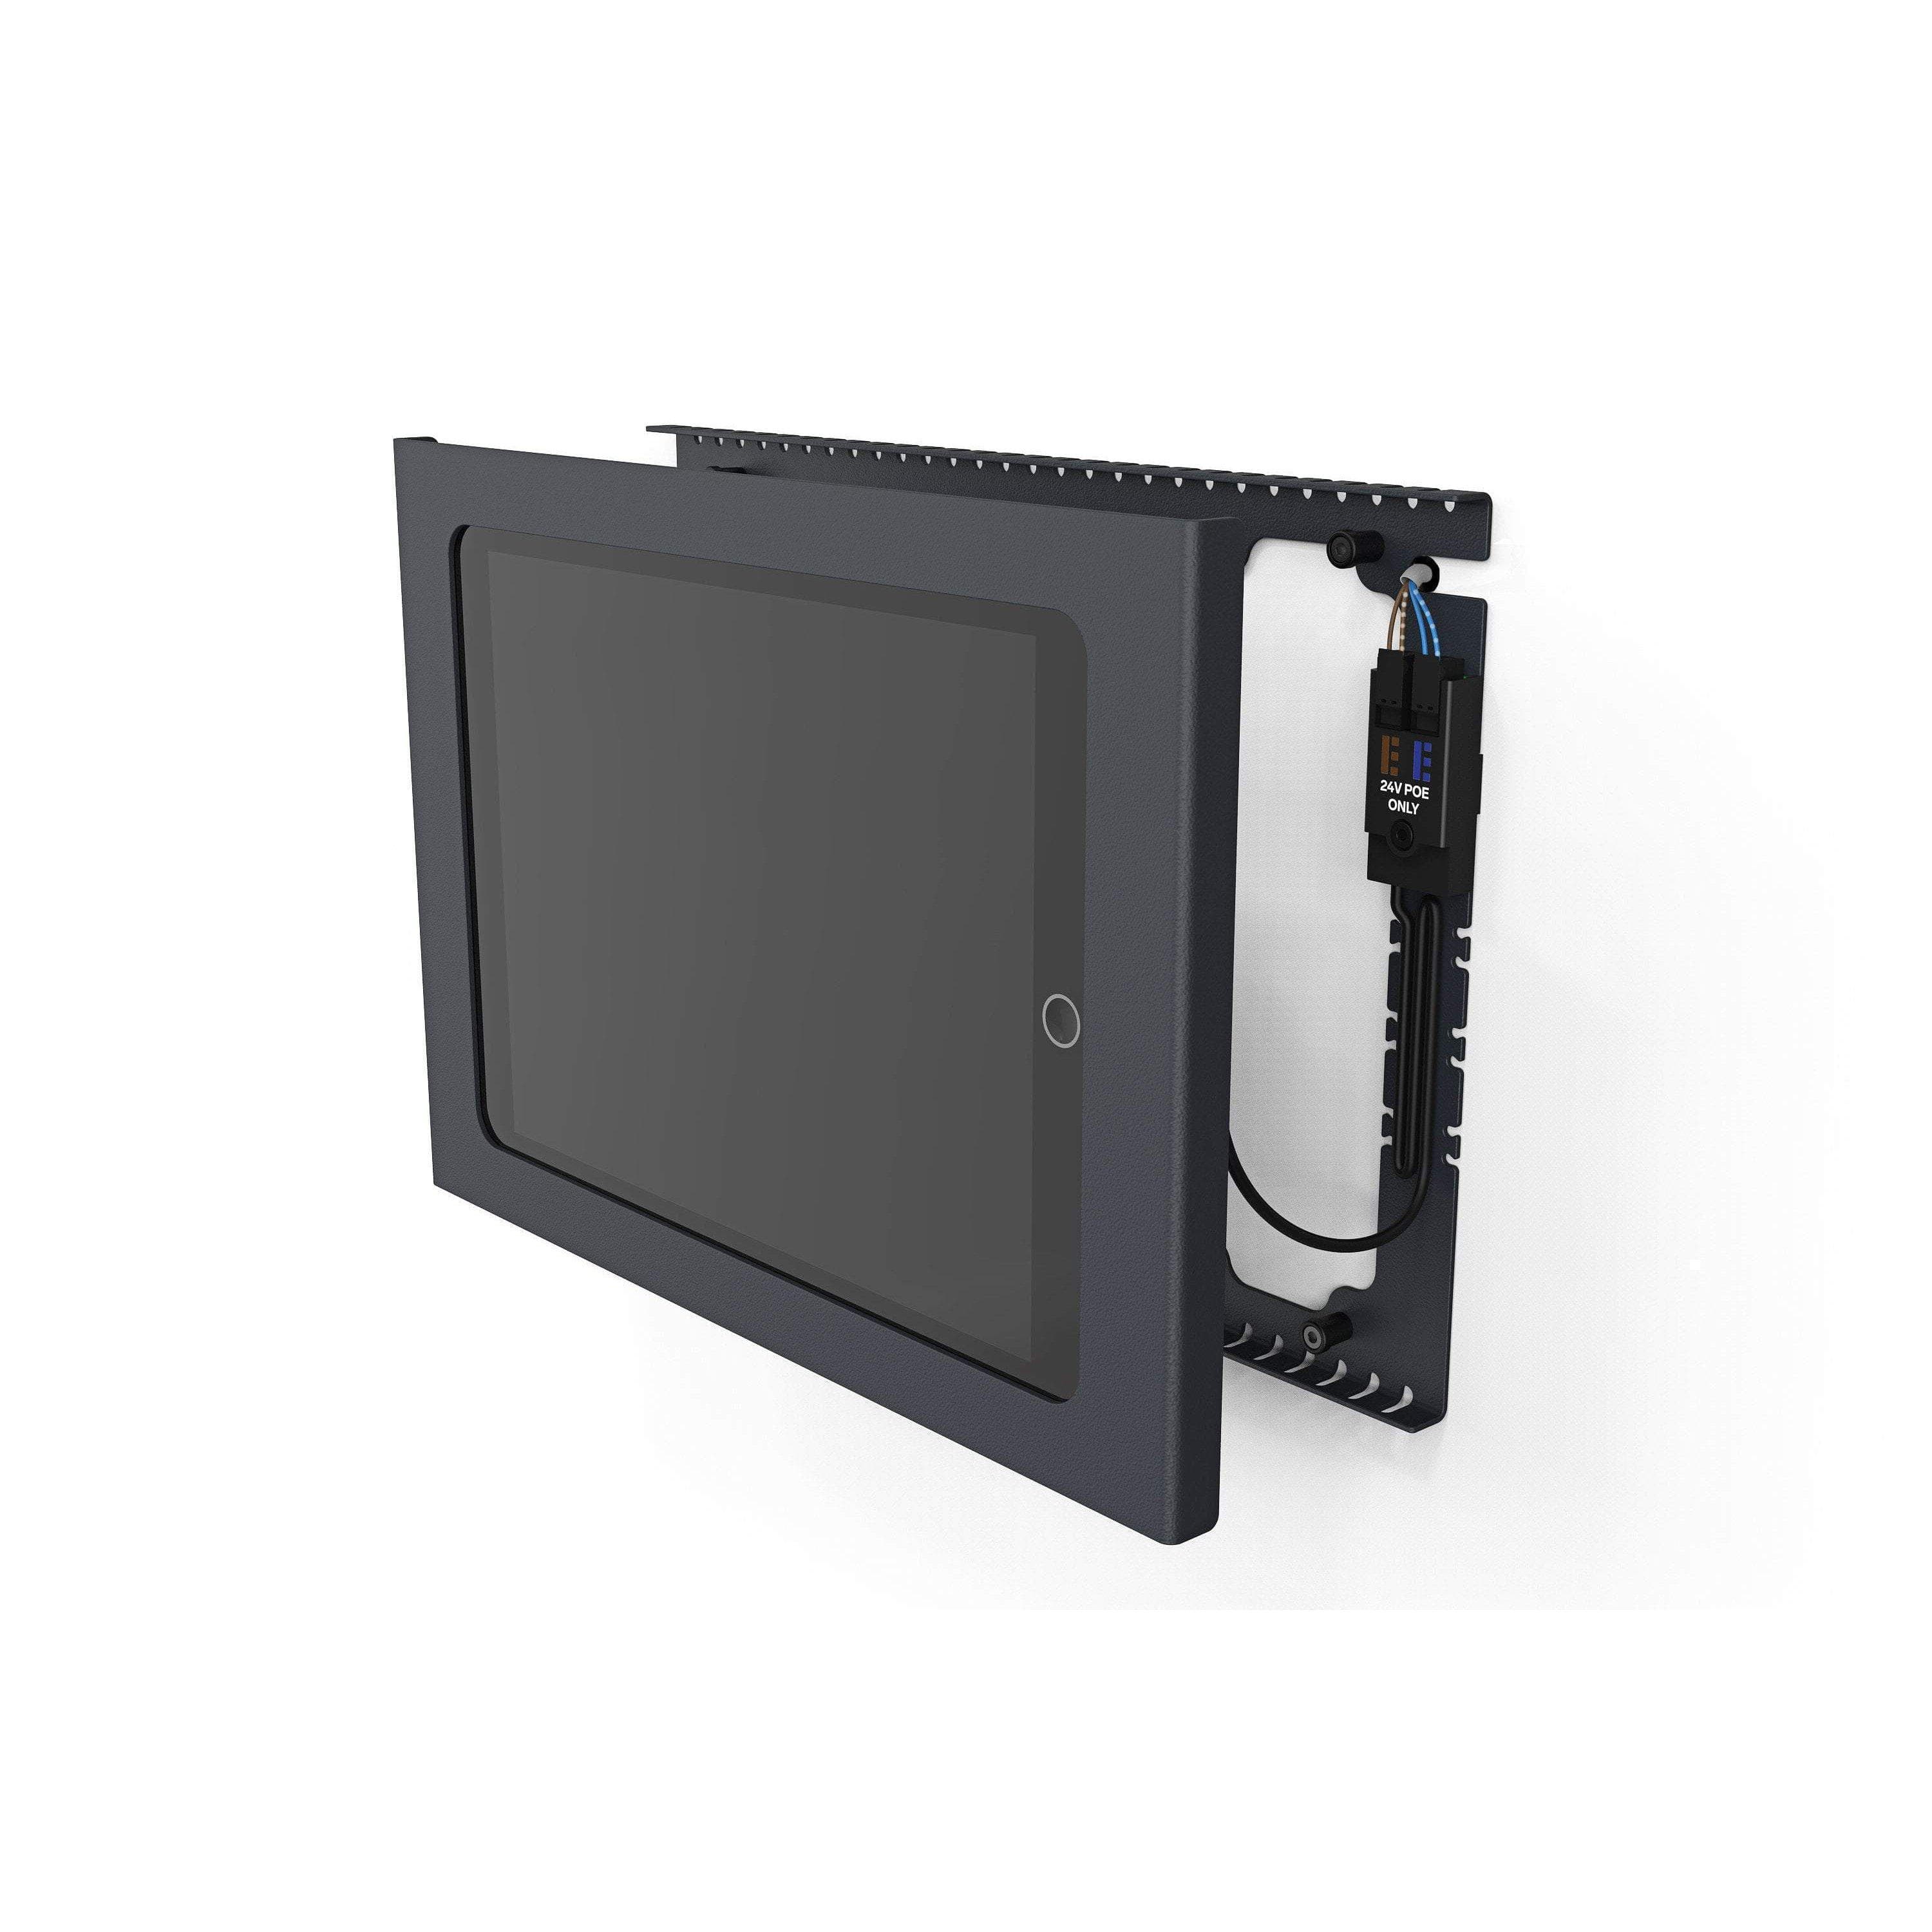 PoE Texas For Tablets Heckler Wall Mount Enclosure with Power for iPad for Digital Signage, Zoom Conference Room Schedulers, and More - 802.3af - Fits 10.2" iPad 7th Generation